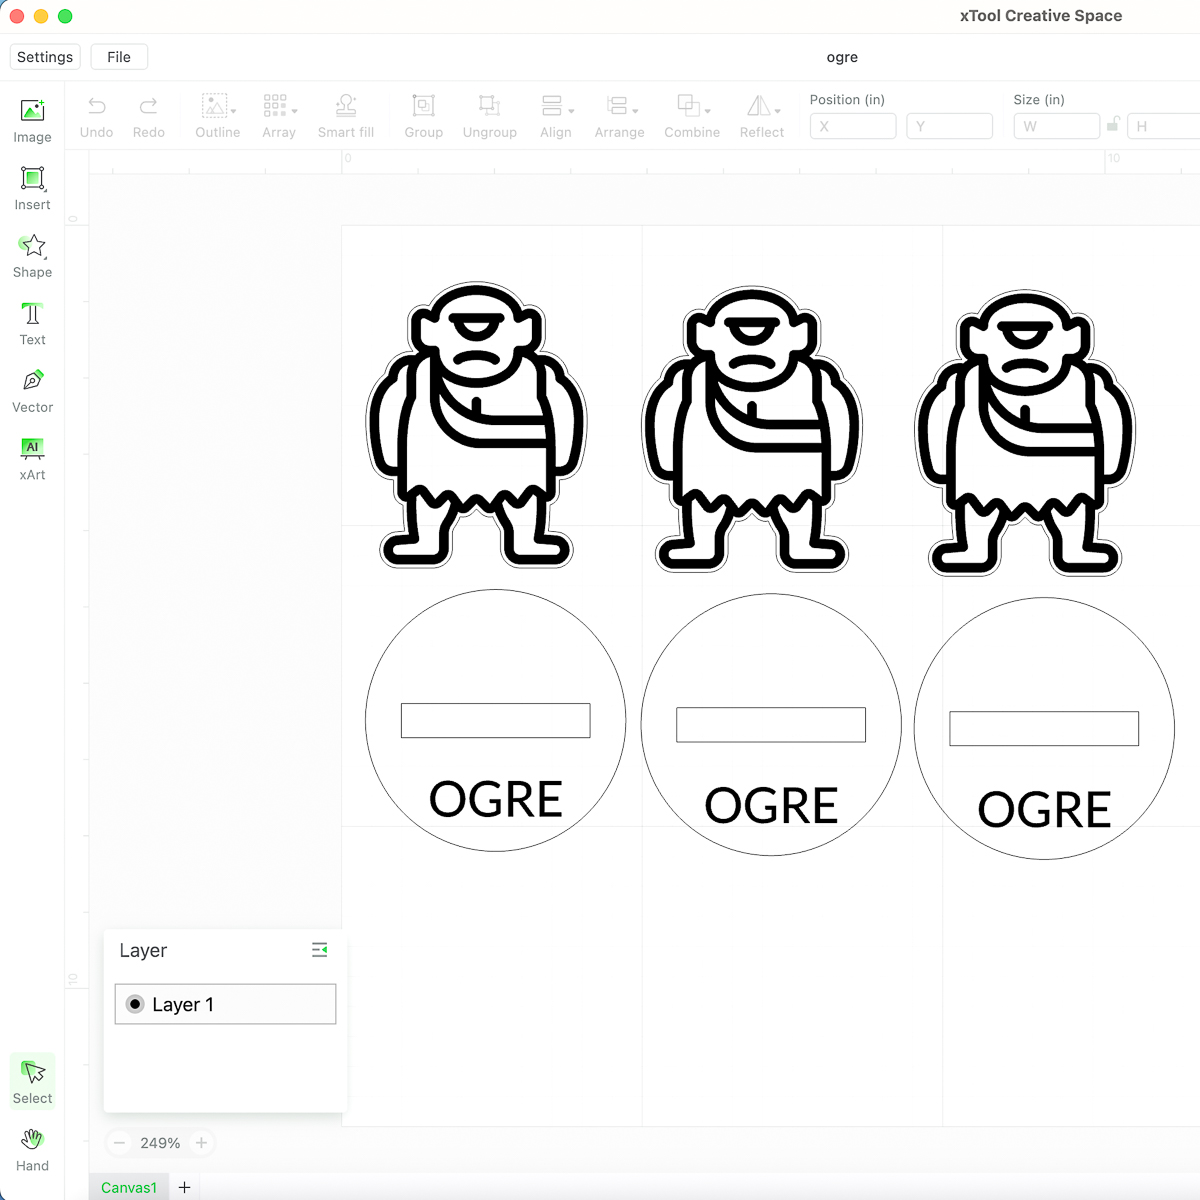 using xTool Creative Space to create the file for three ogre miniatures